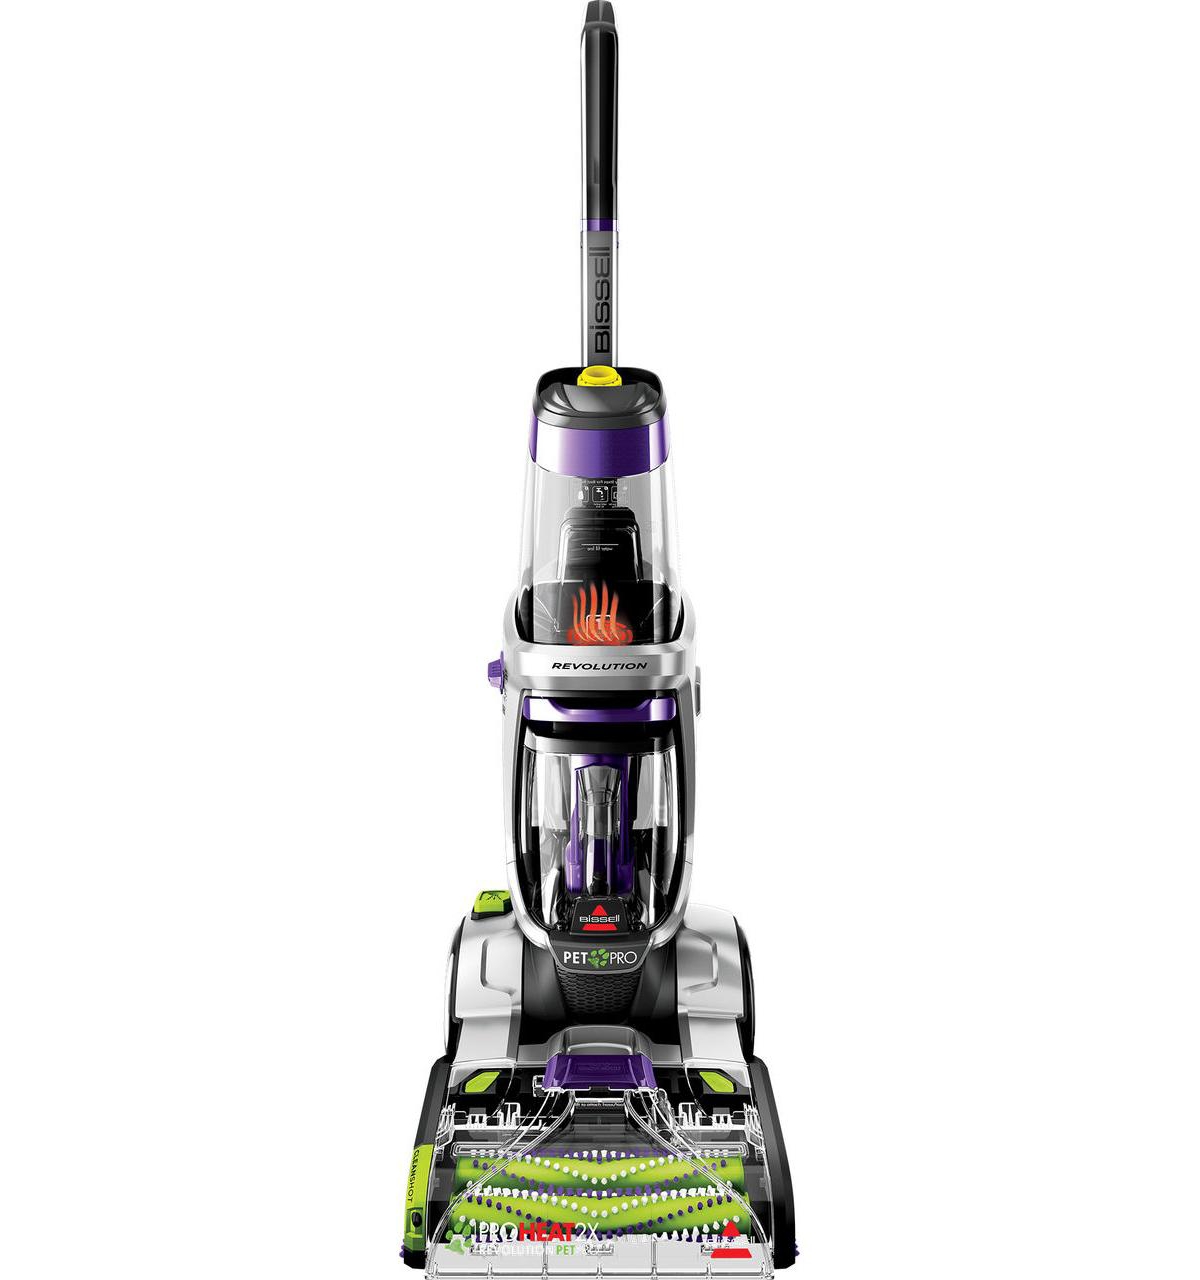 ProHeat 2X Revolution Pet Pro Plus Carpet Cleaner - Gray with black and purple accents